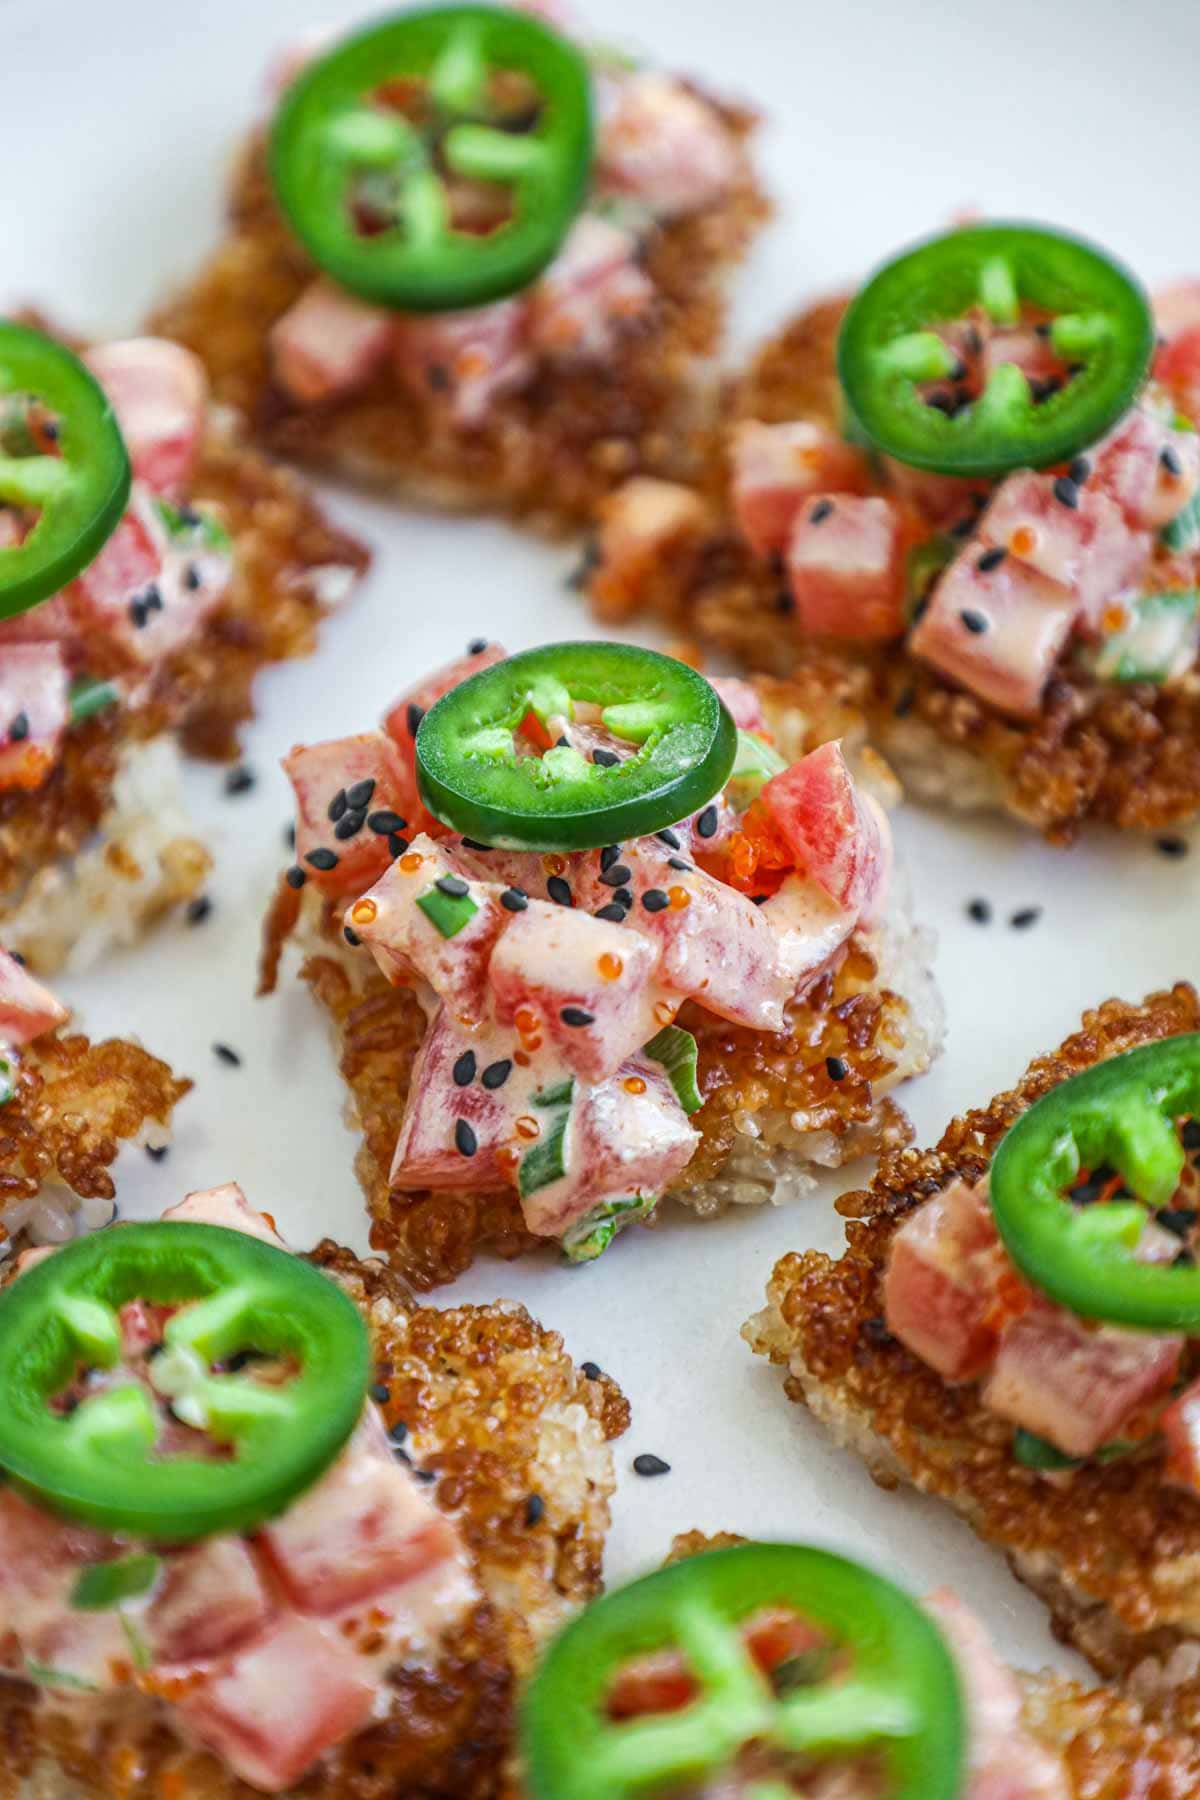 Spicy tuna with crispy rice topped with jalapeño on a platter.